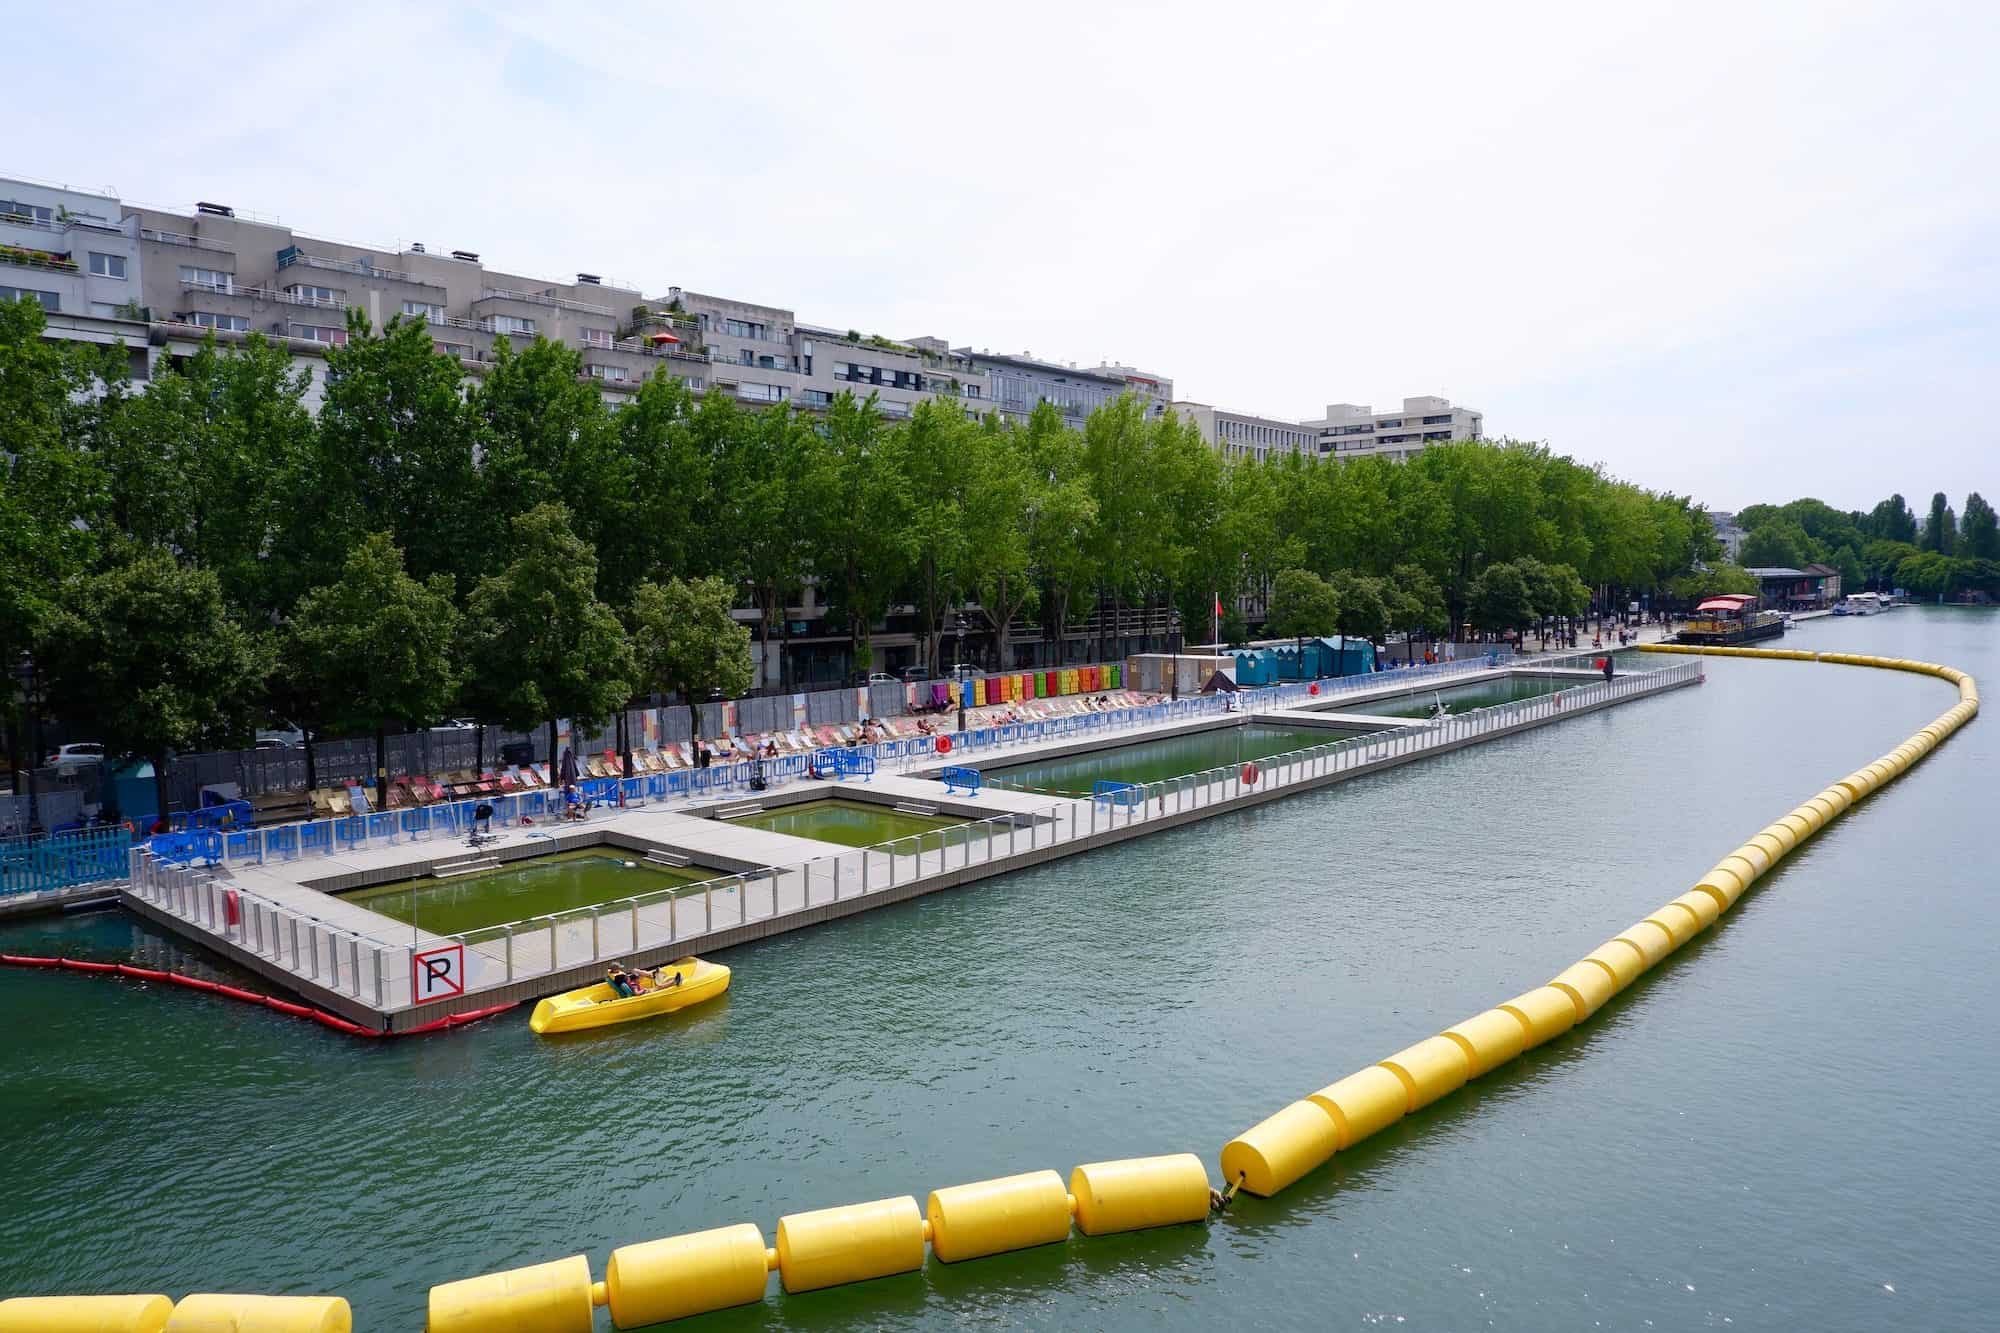 The swimming pool at the Canal de l'Ourcq in Paris